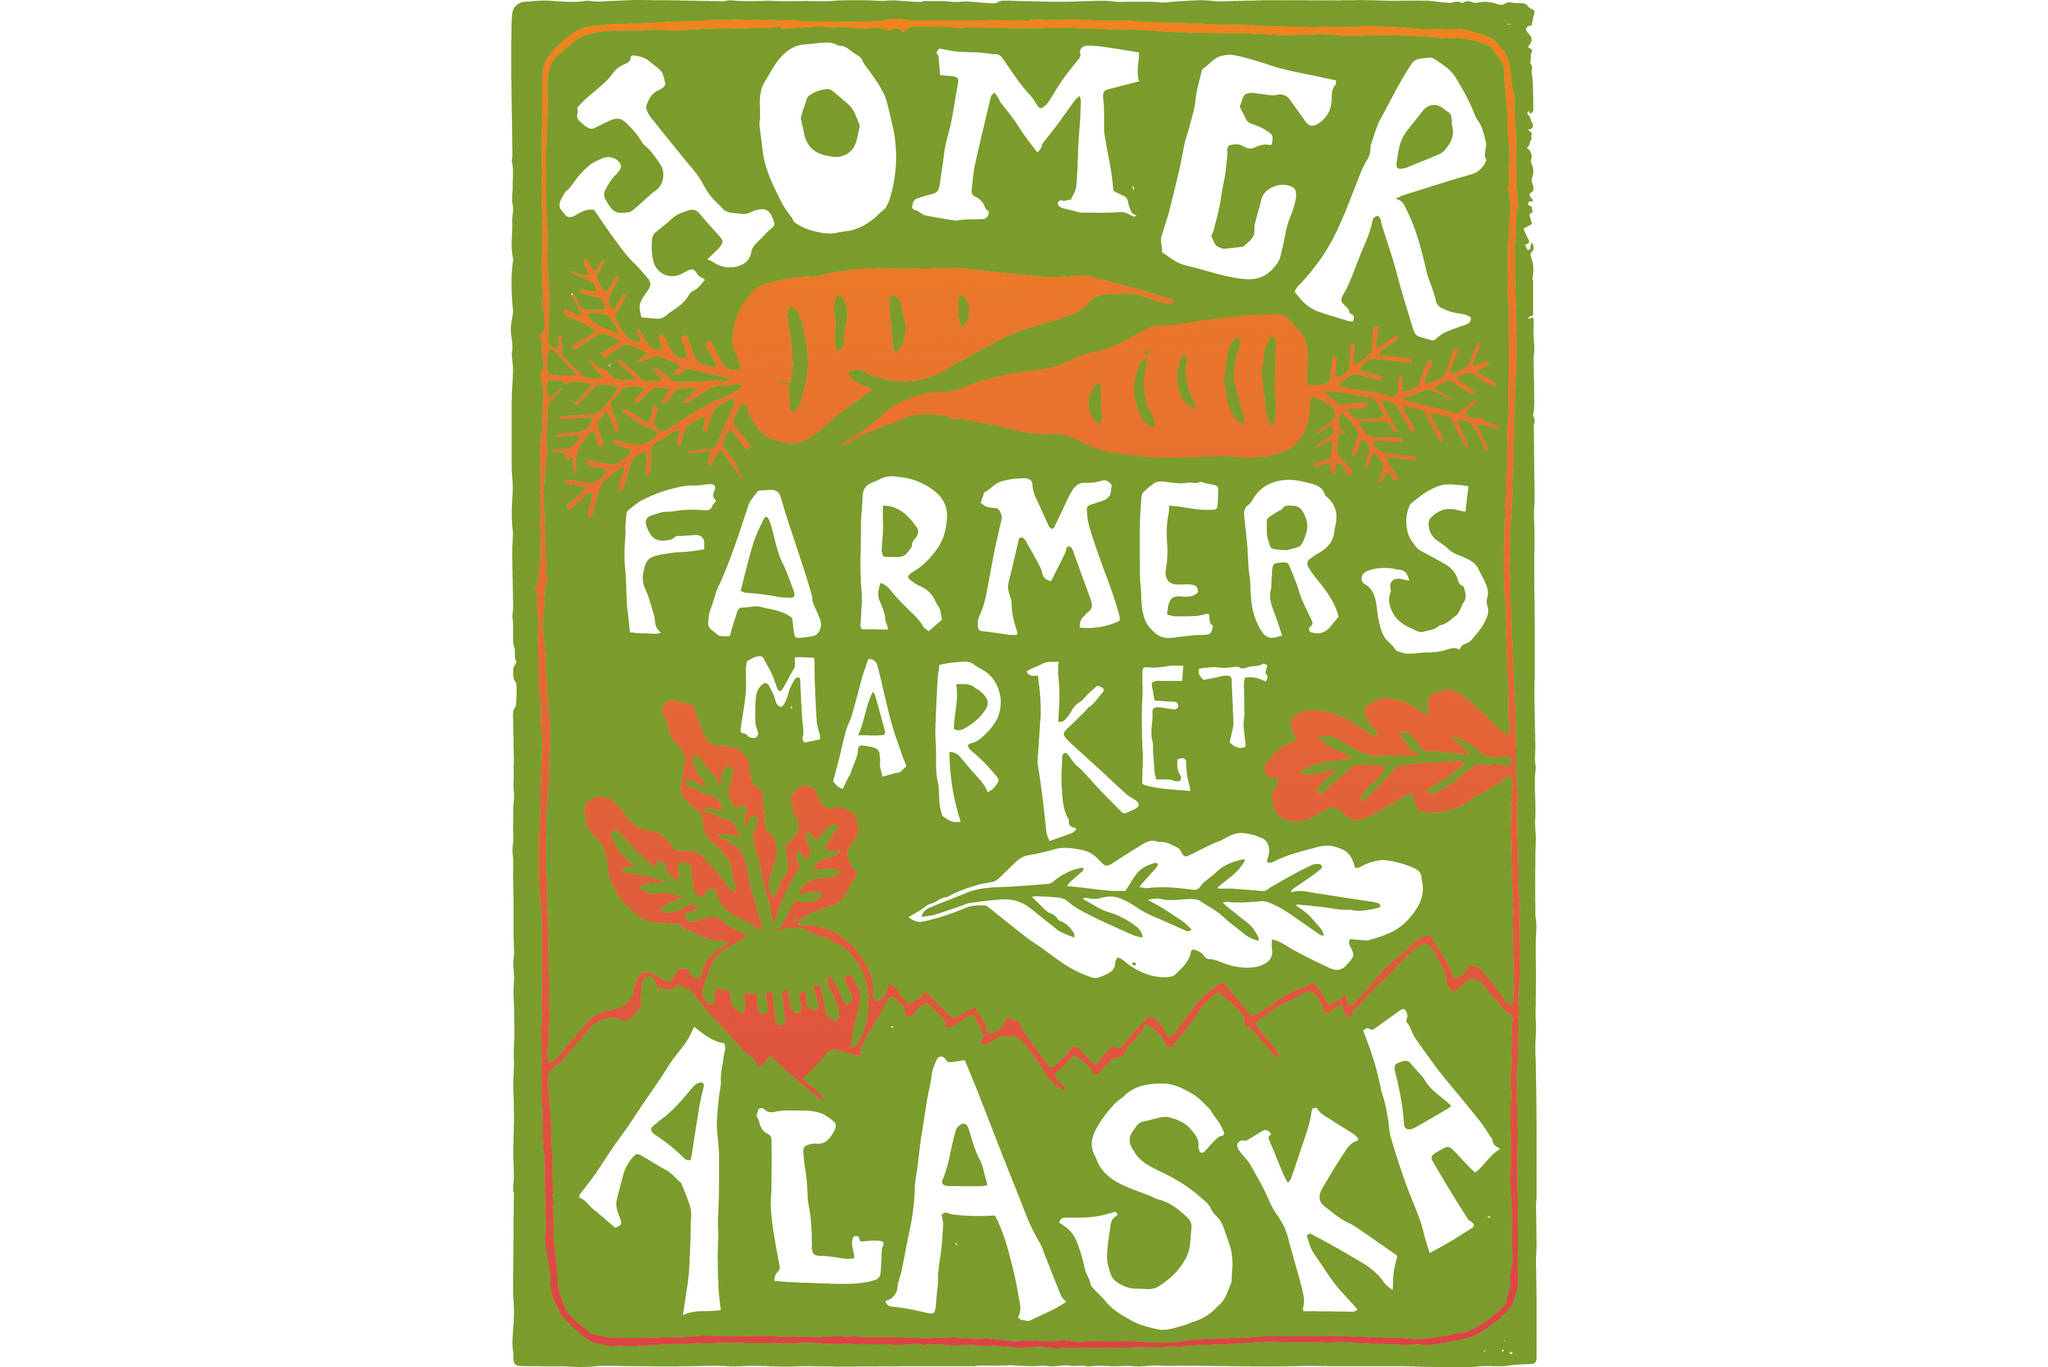 Homer Farmers Market: Market includes veterans from 20 years ago